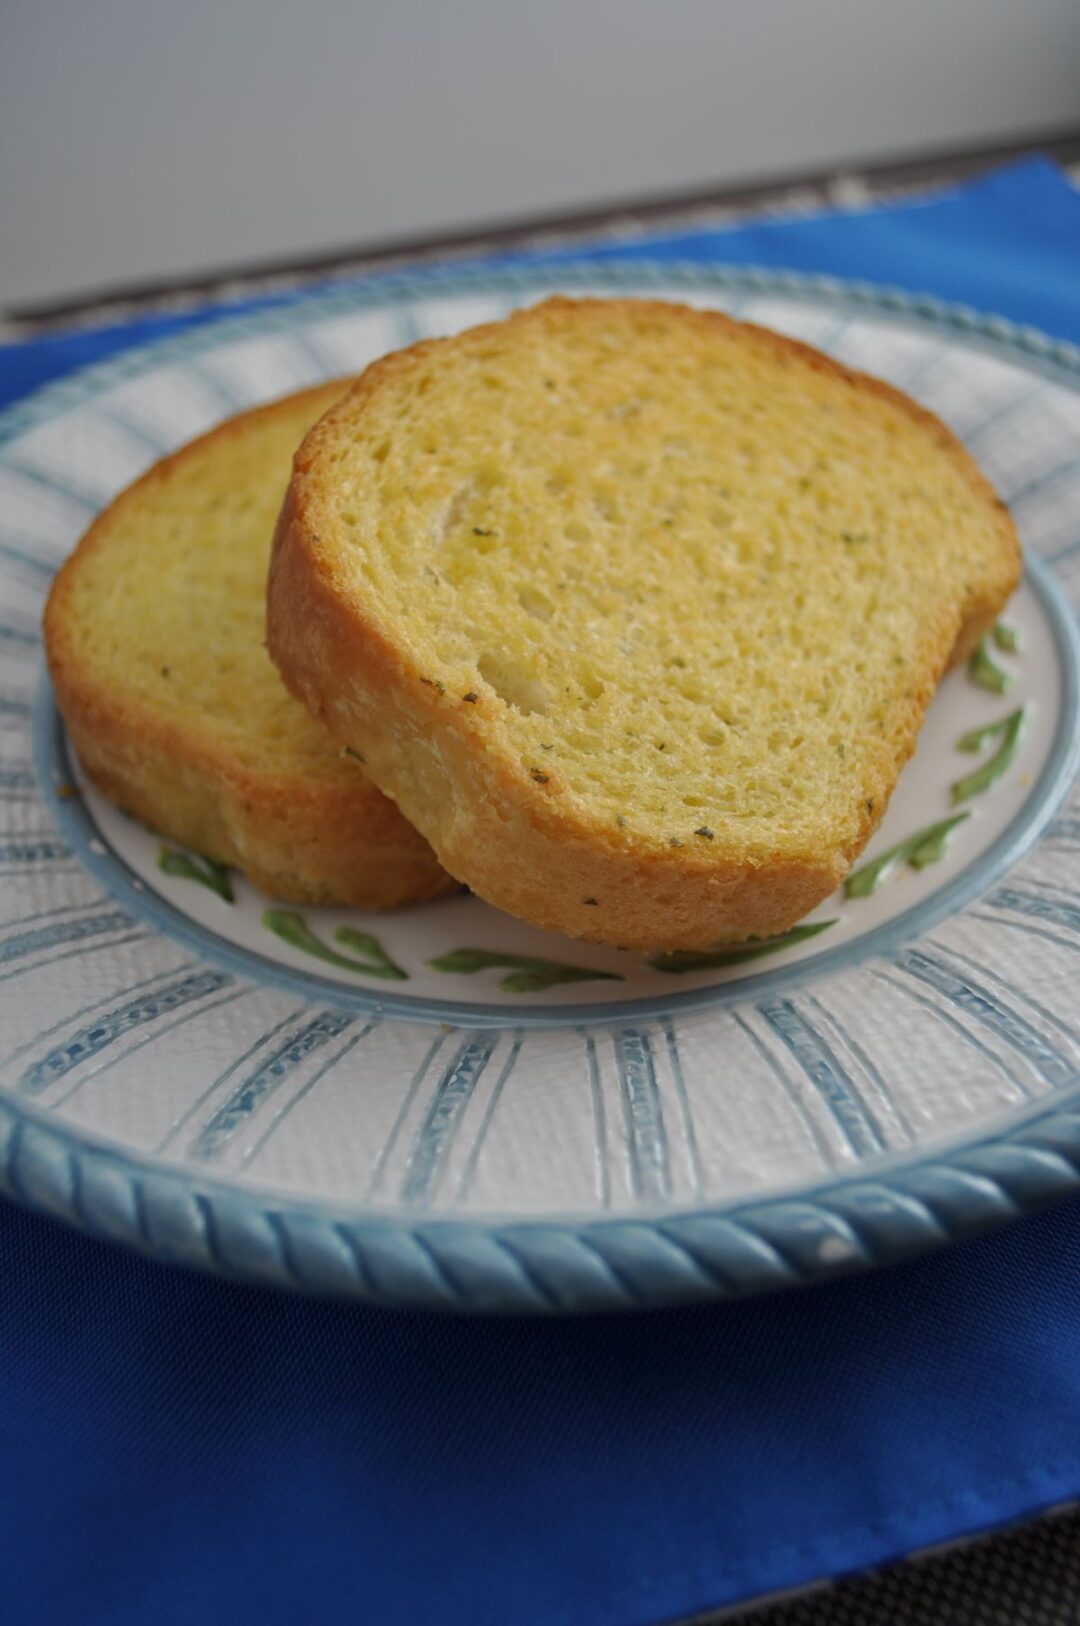 Two pieces of golden colored garlic Texas Toast on a blue and white plate sitting on a blue placemat.